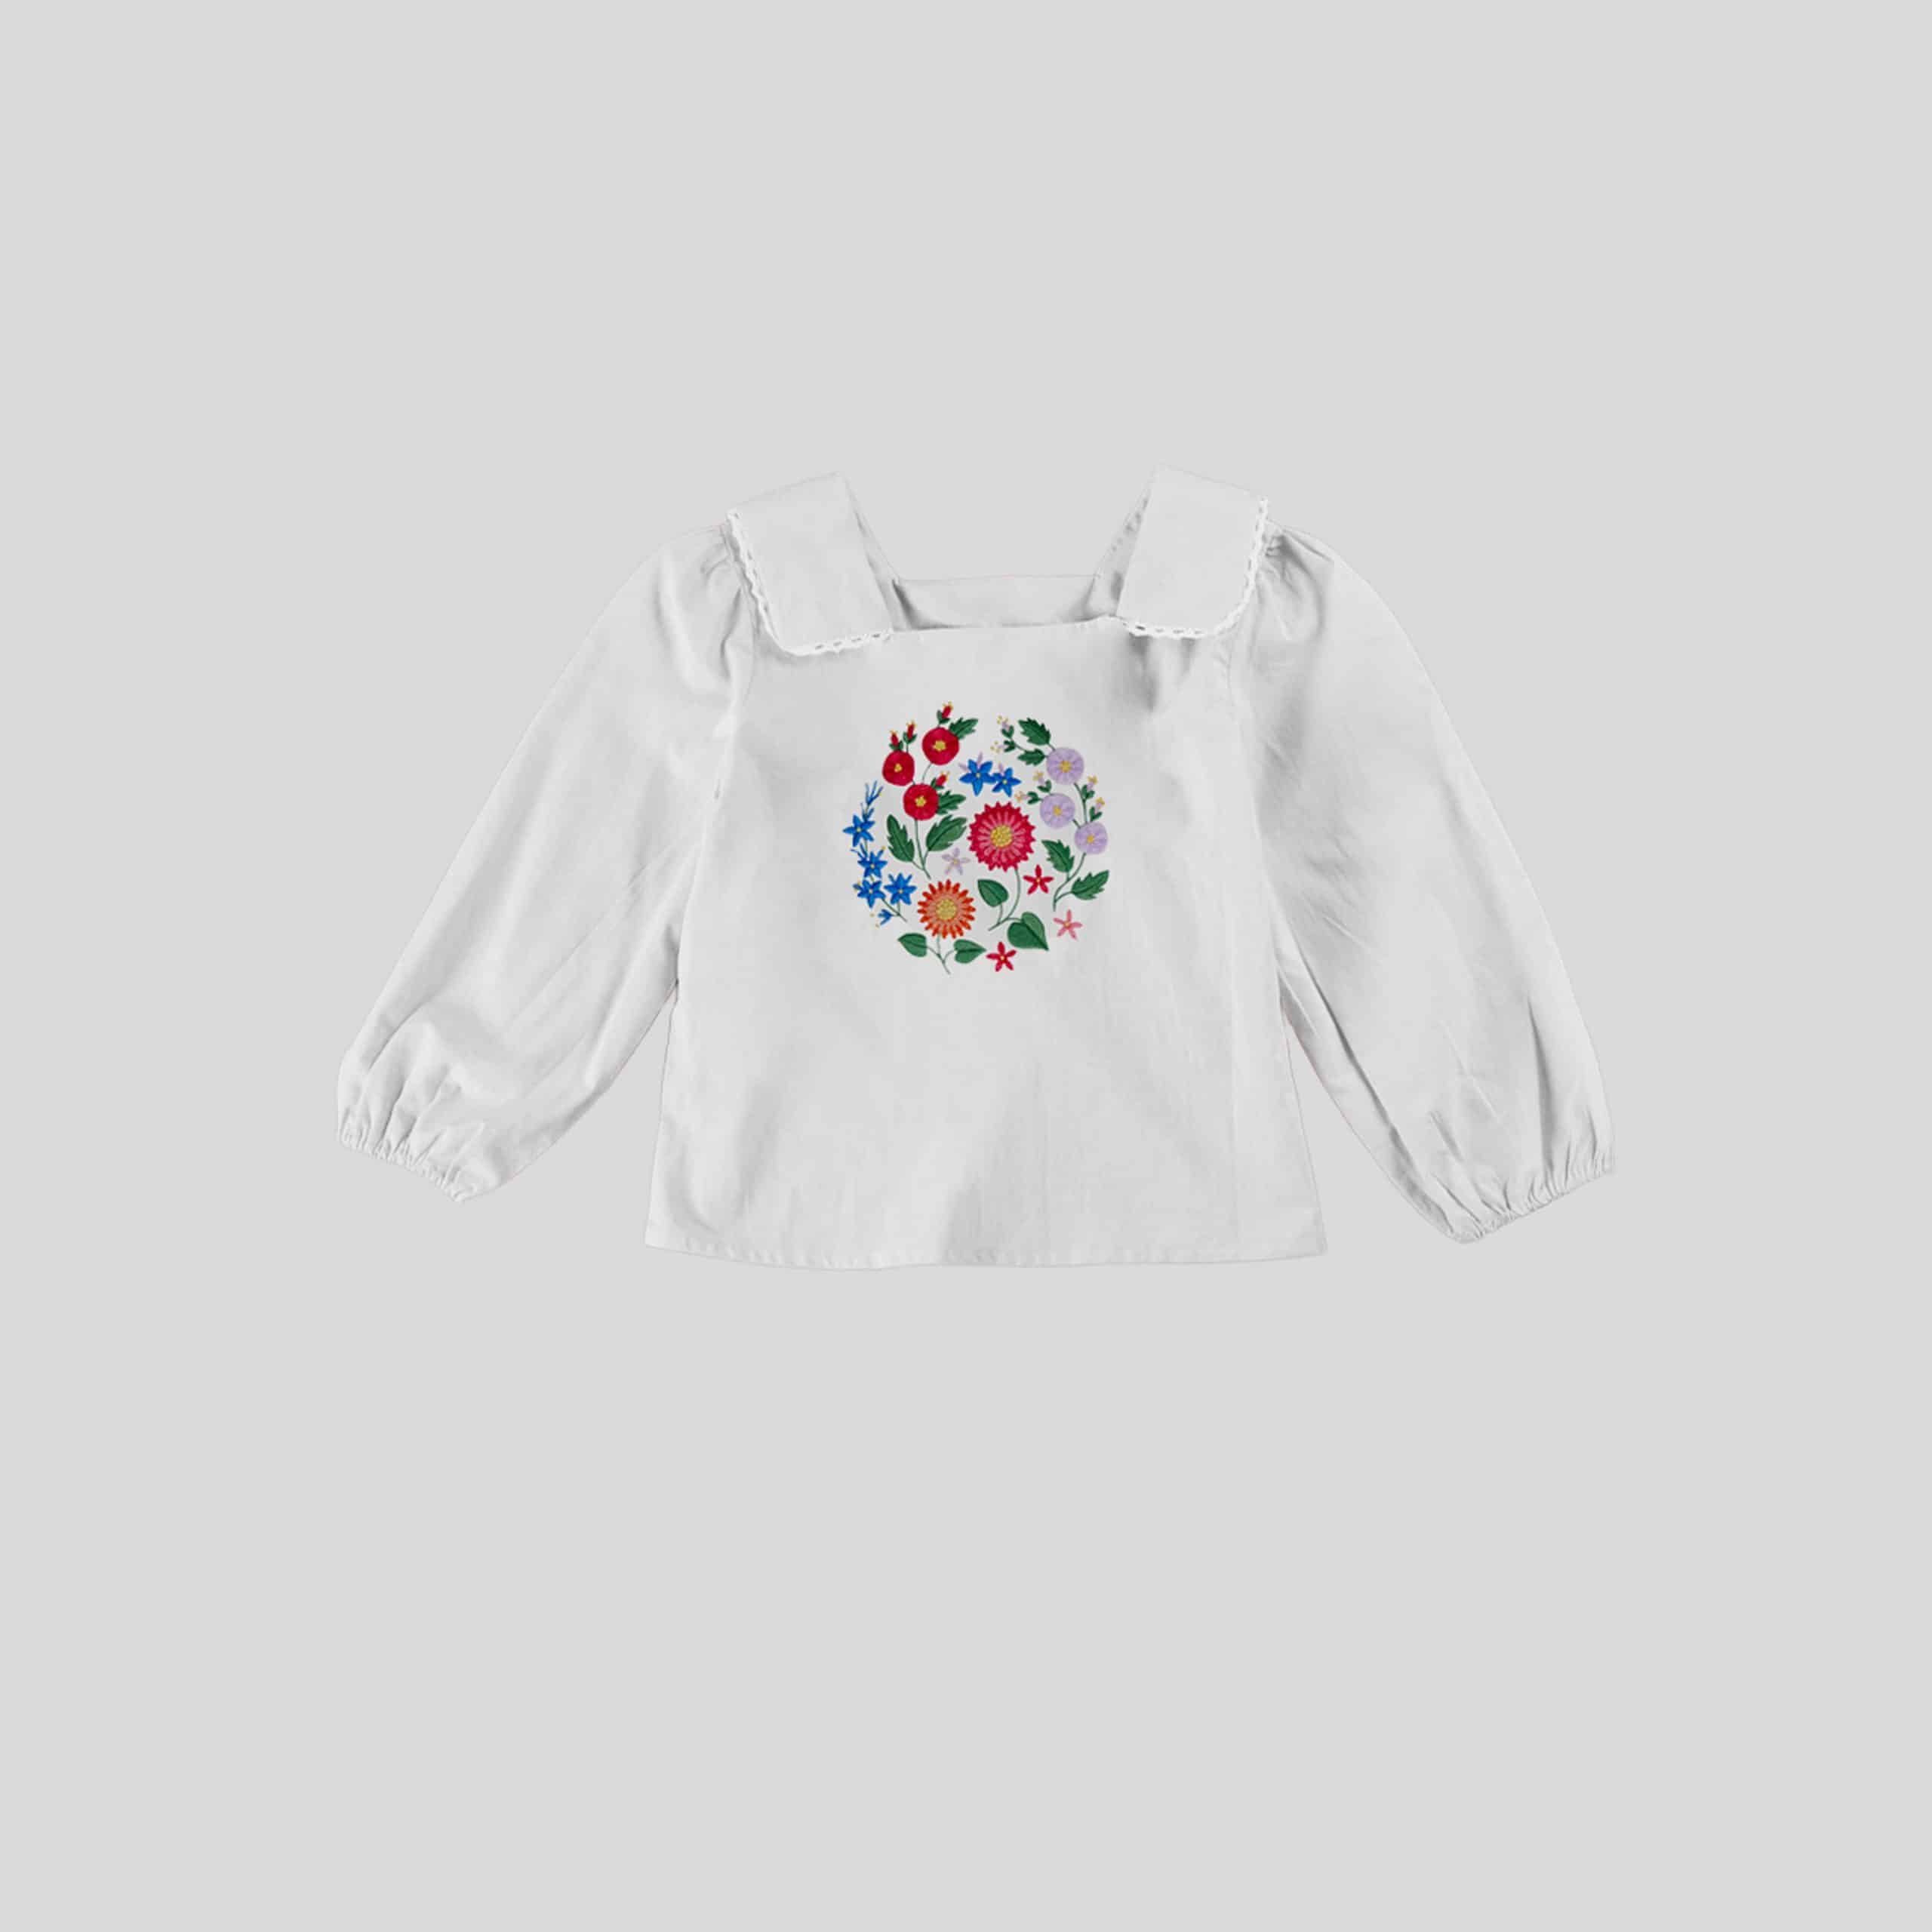 Girls White Top with Cute Floral Print - RKFCW334